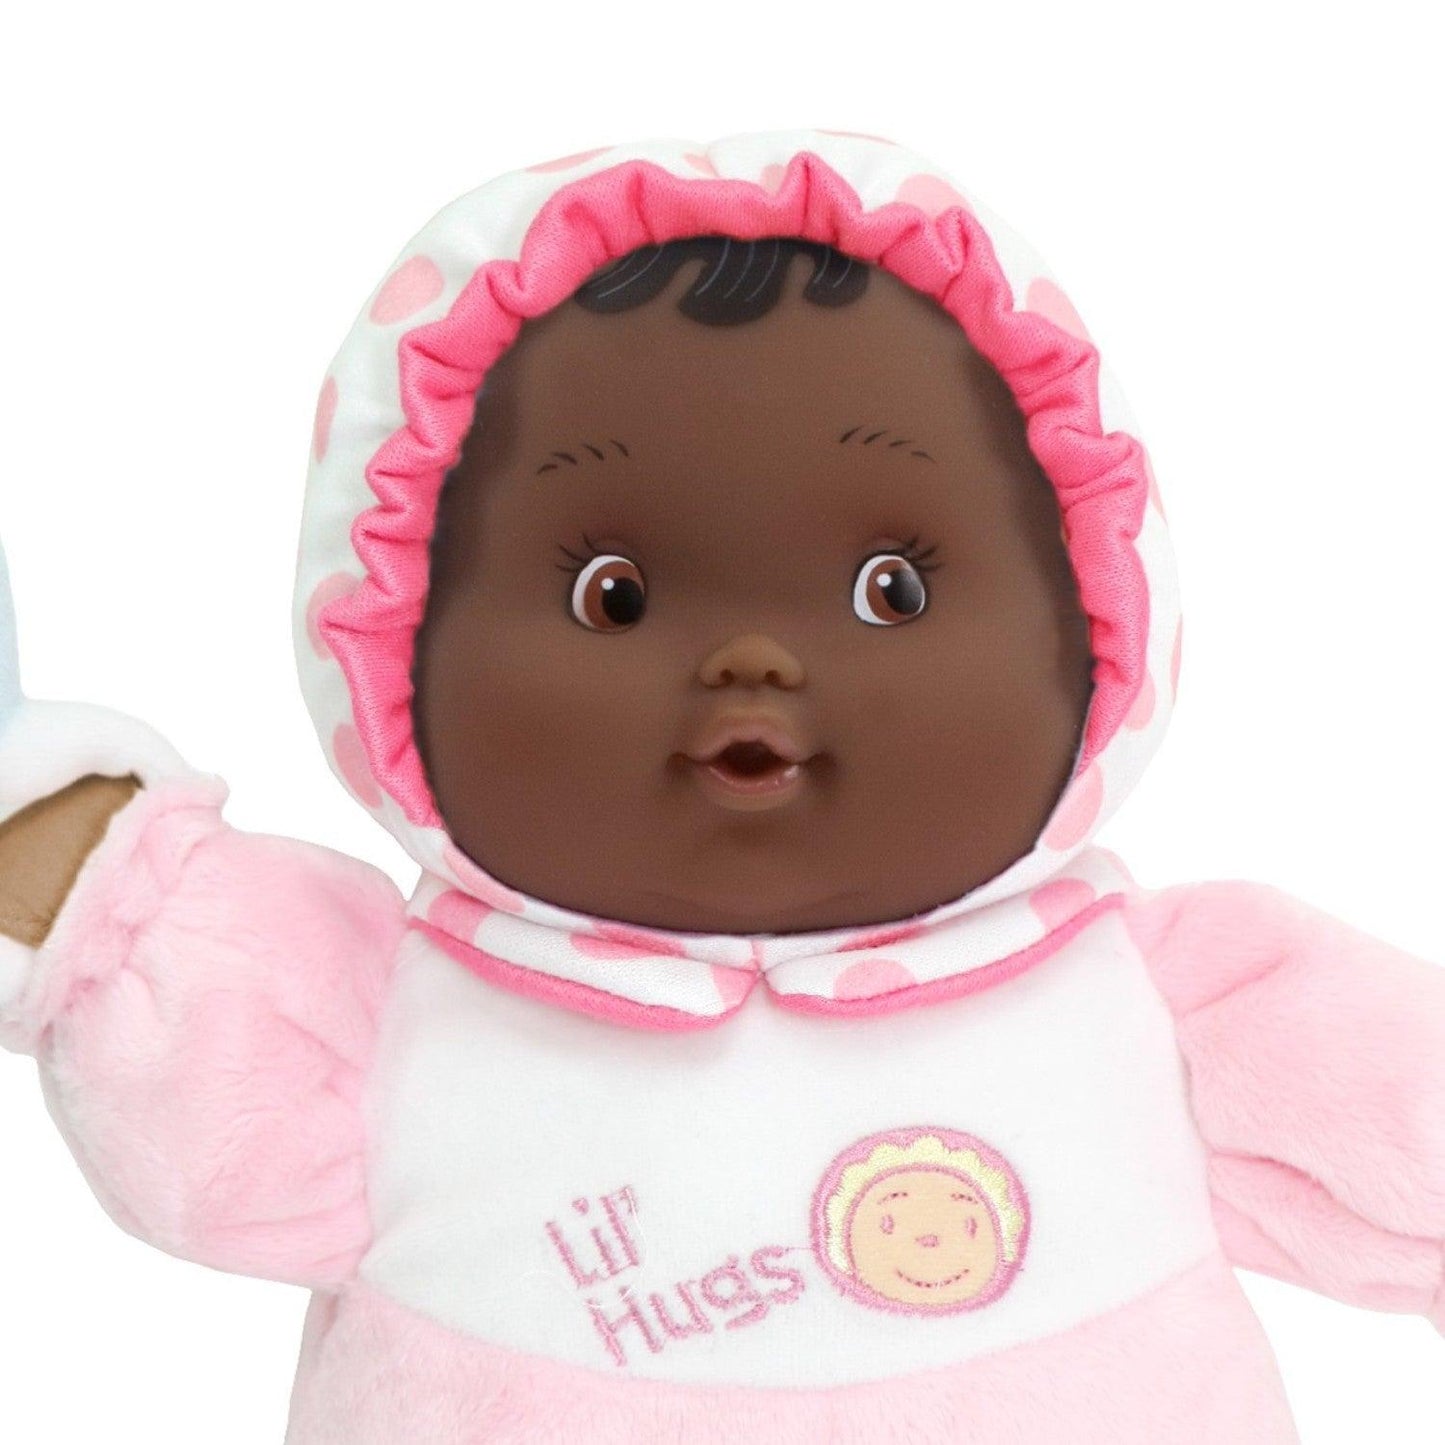 Lil' Hugs 12" Baby's First Doll - African American - JC Toys Group Inc.